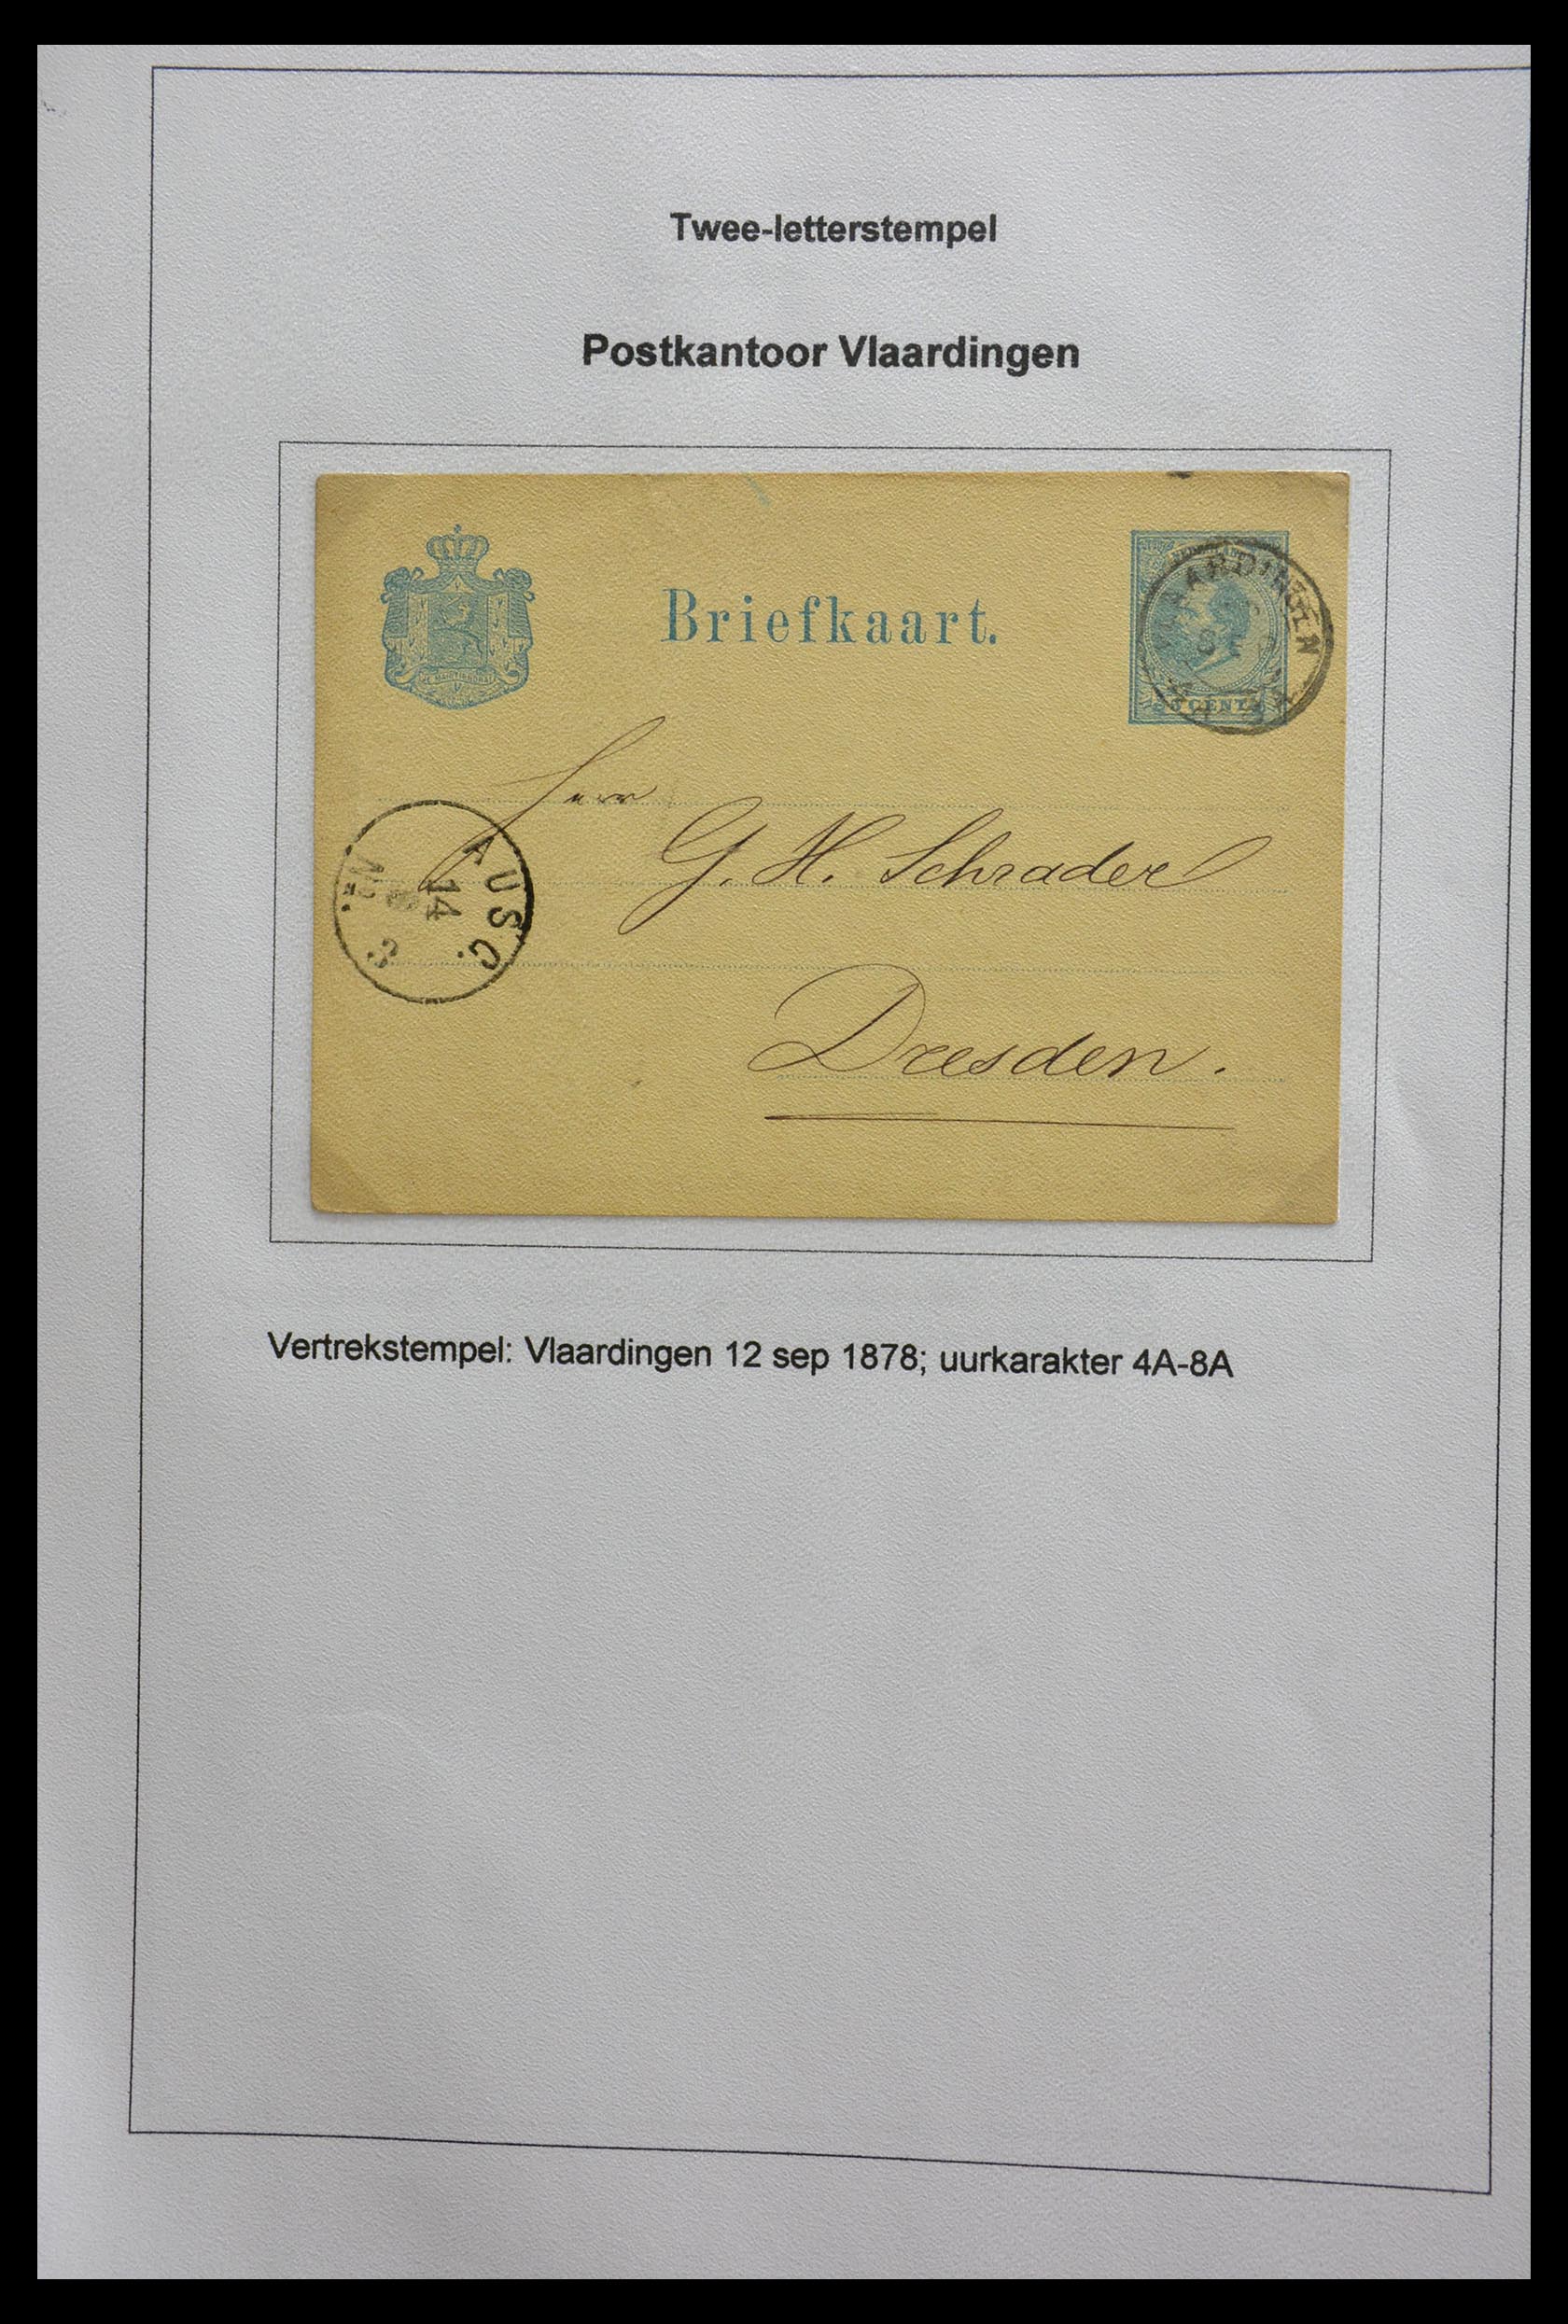 29365 055 - 29365 Netherlands 2-character cancels.